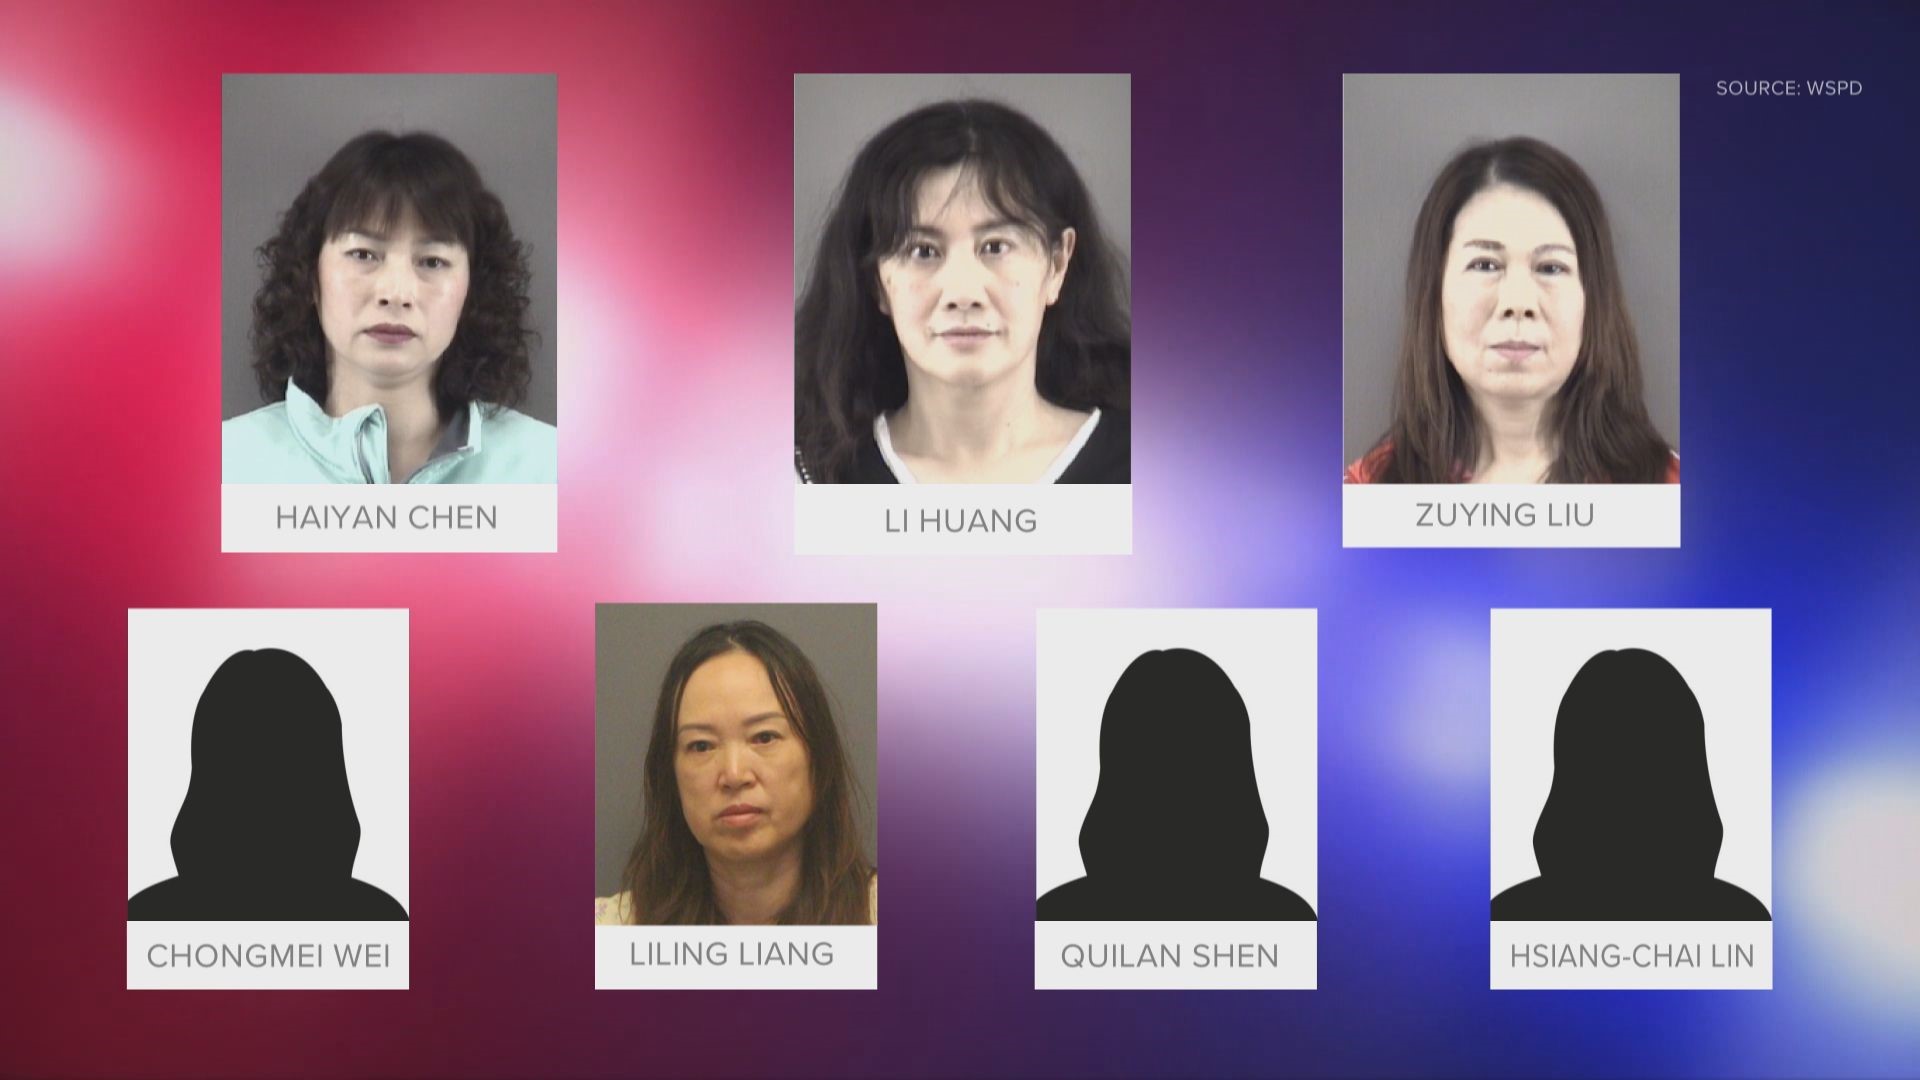 Detectives said two women, Li Huang, 49, and Chongmei Wei, 59, owned the parlors in Winston-Salem.